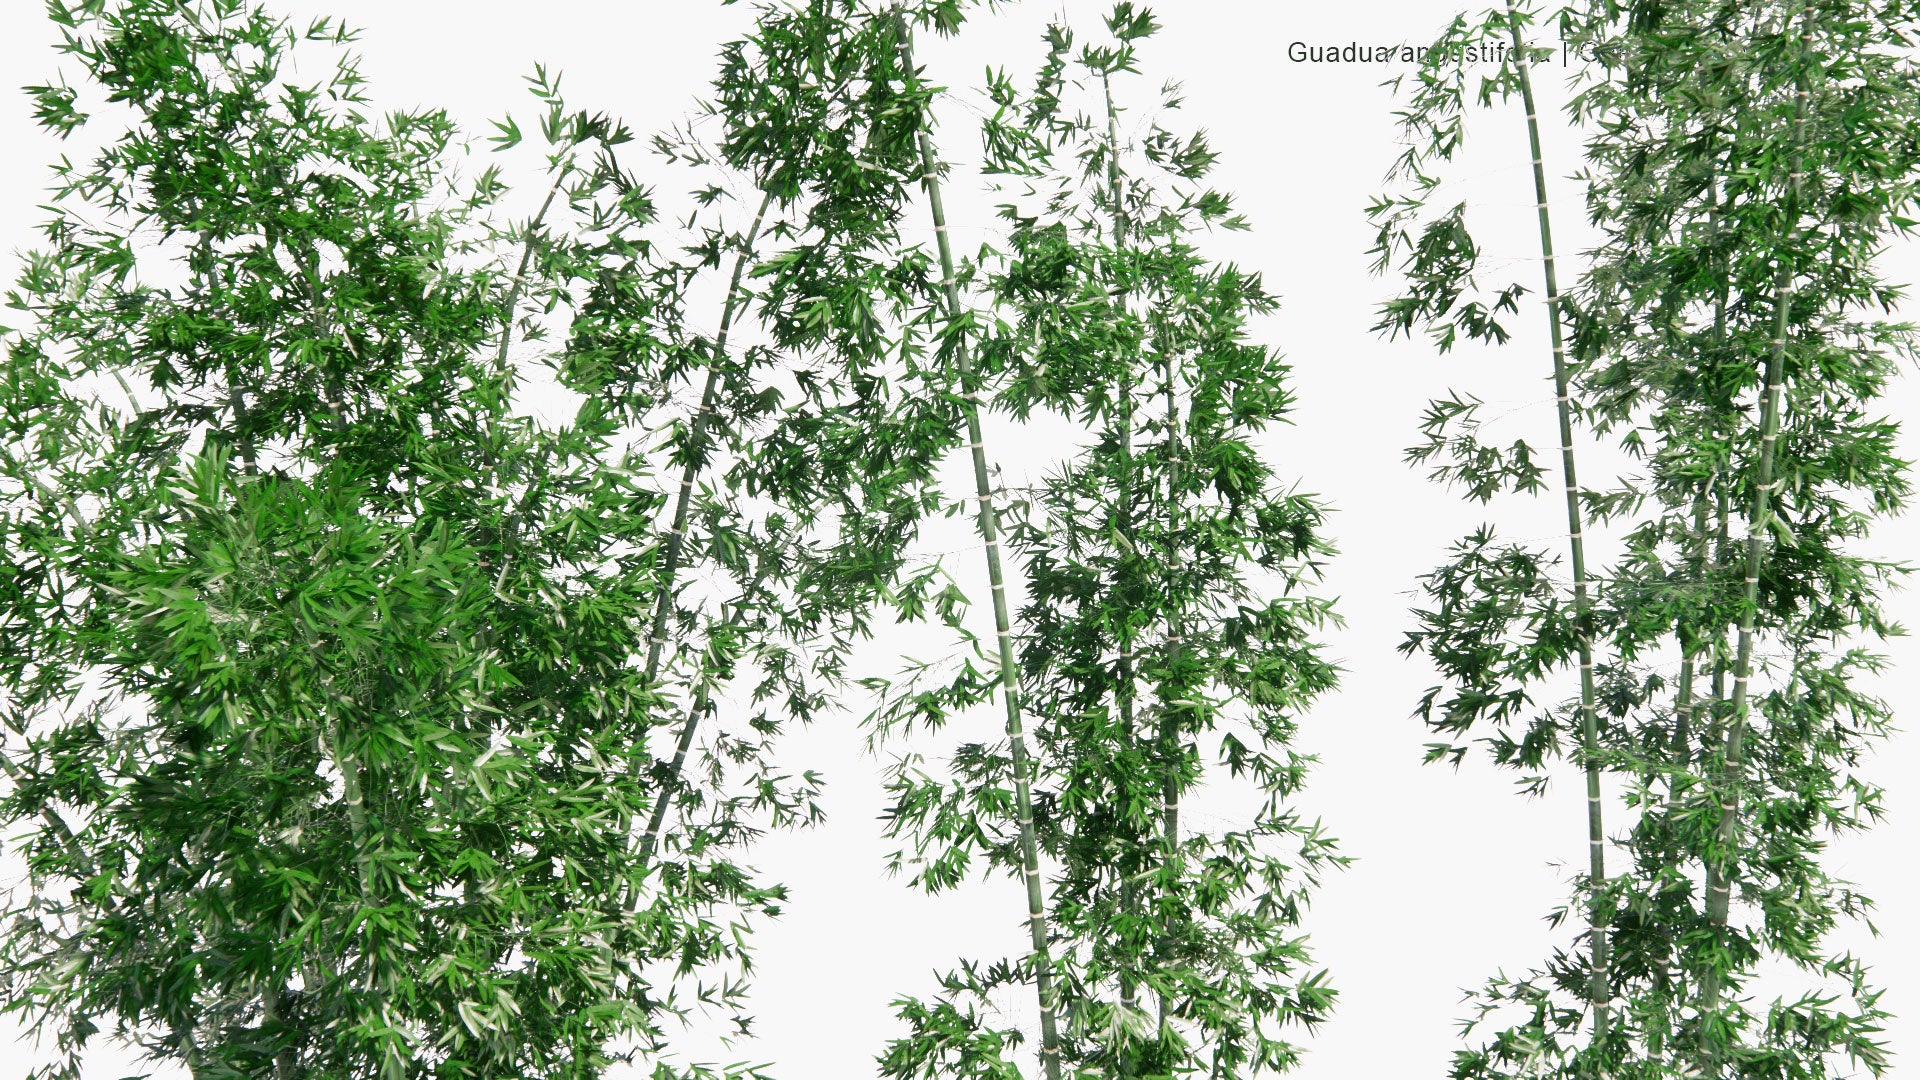 Low Poly Guadua Angustifolia - Colombian Timber Bamboo, Colombian Giant Thorny, Guadua Bamboo (3D Model)